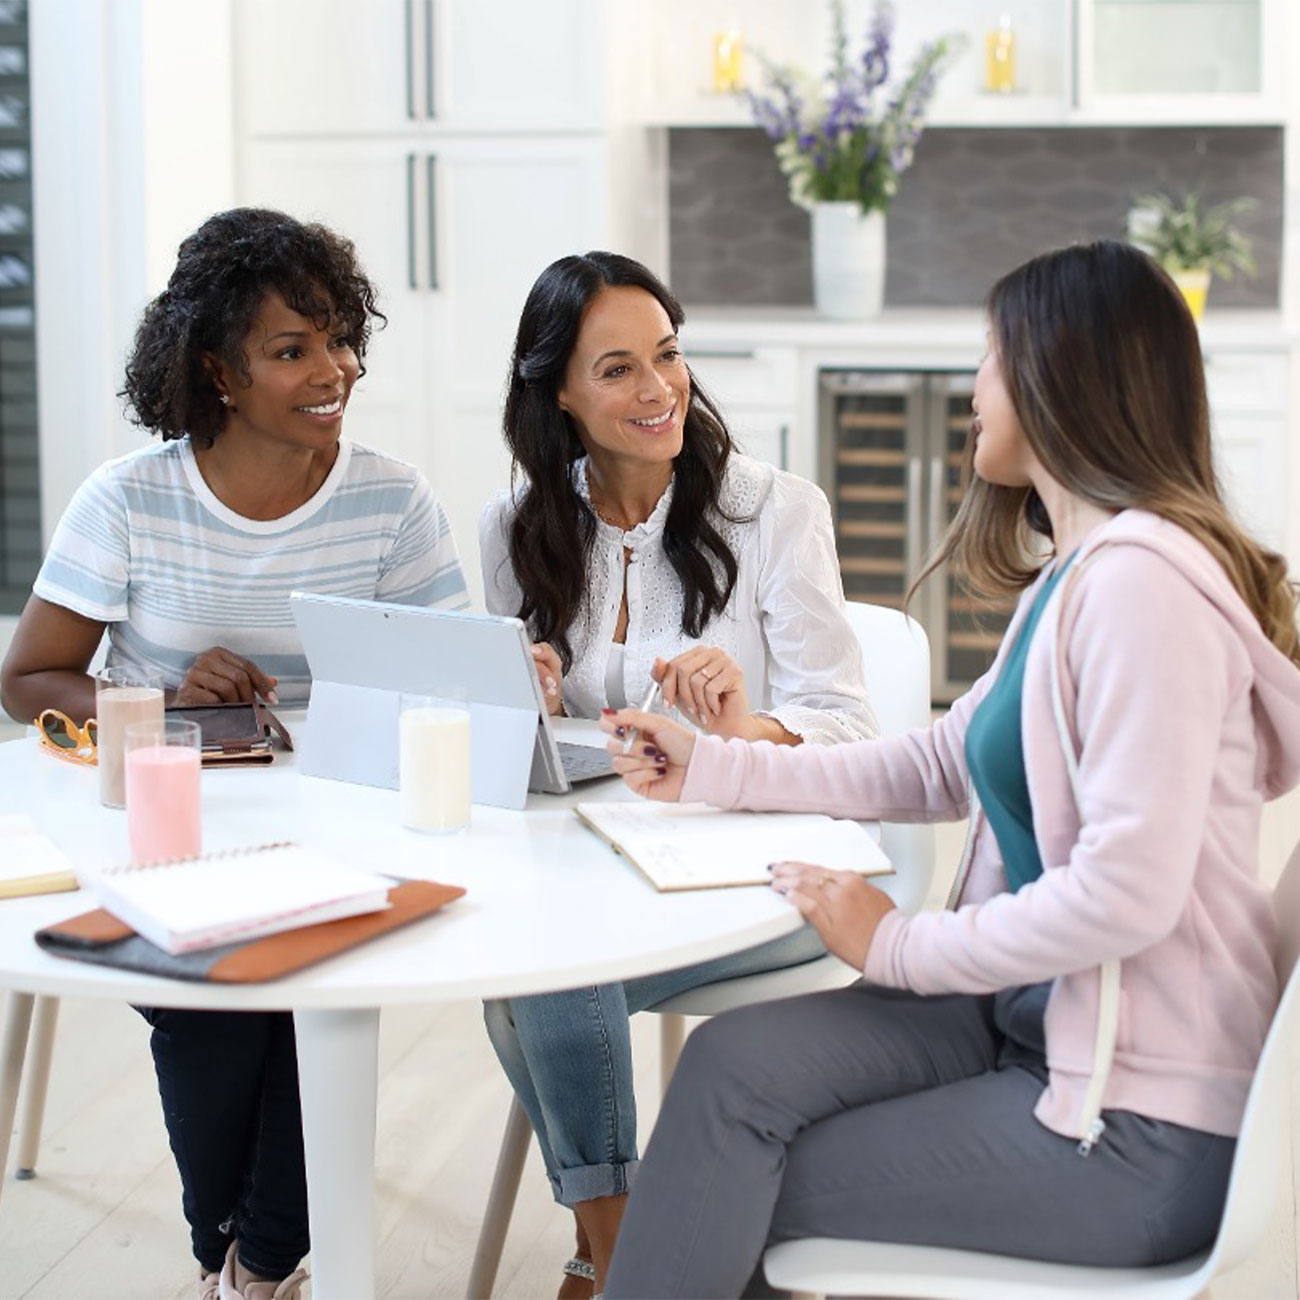 Herbalife Nutrition members at a table, smiling and having a conversation